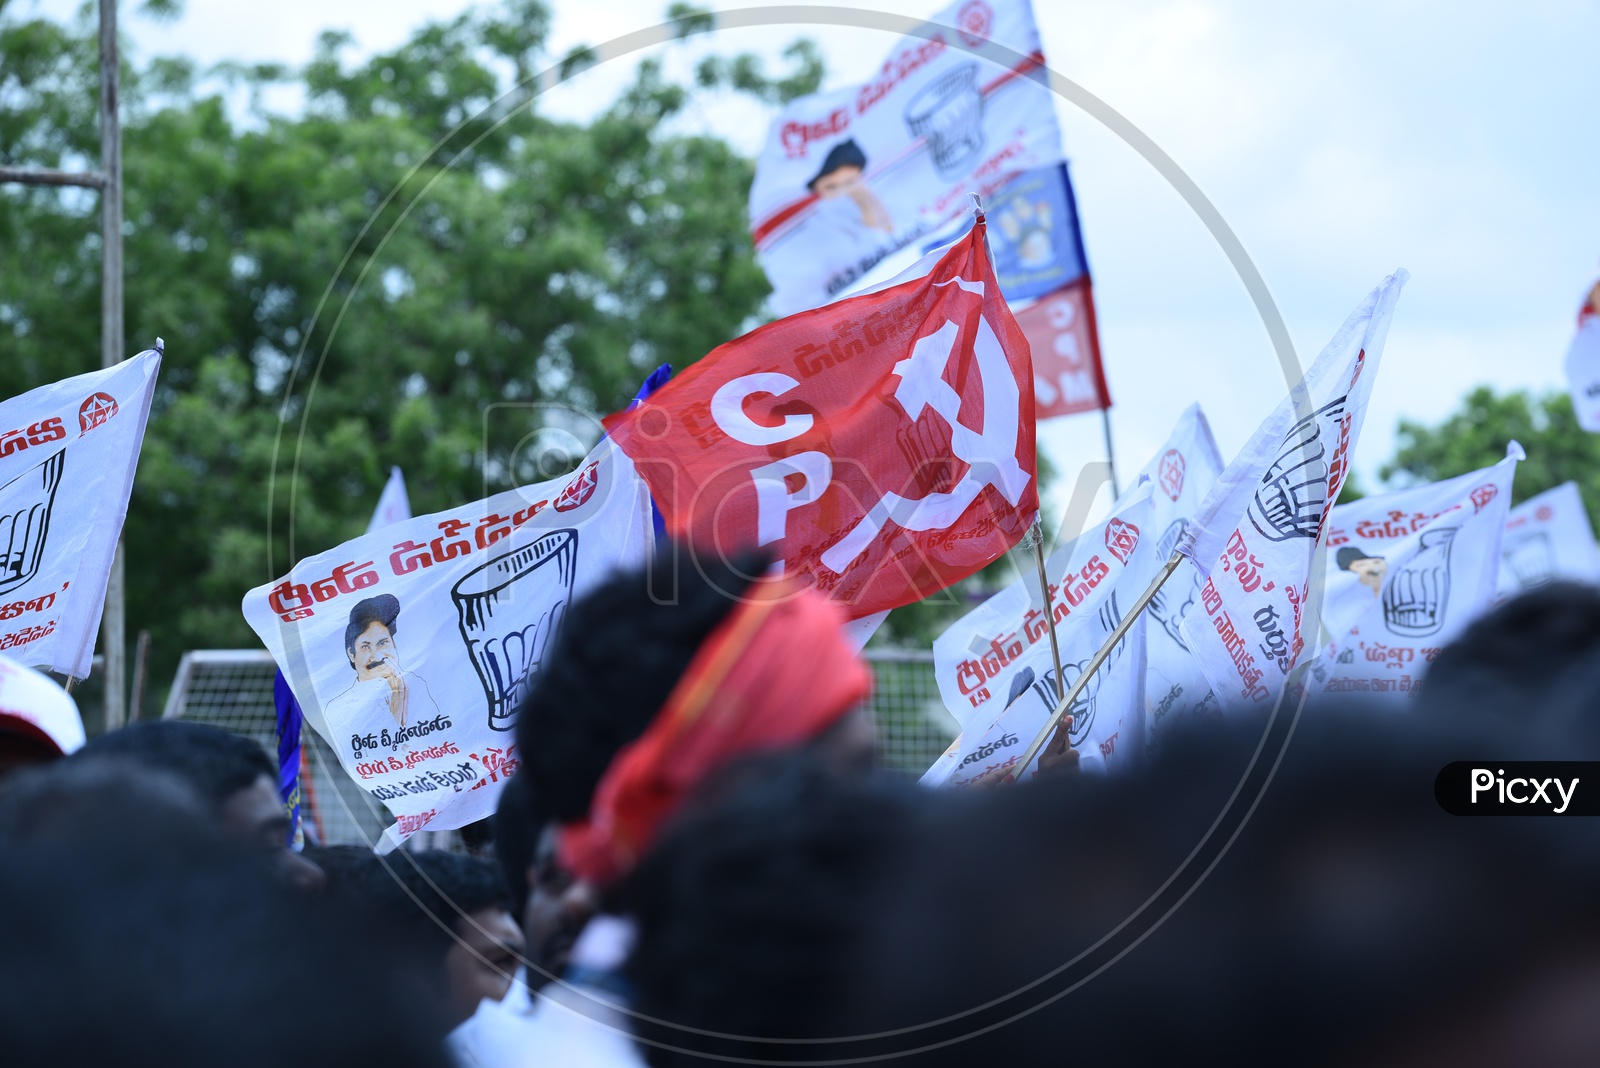 CPI party flag and Jana sena party flags at an election campaign in Amalapuram